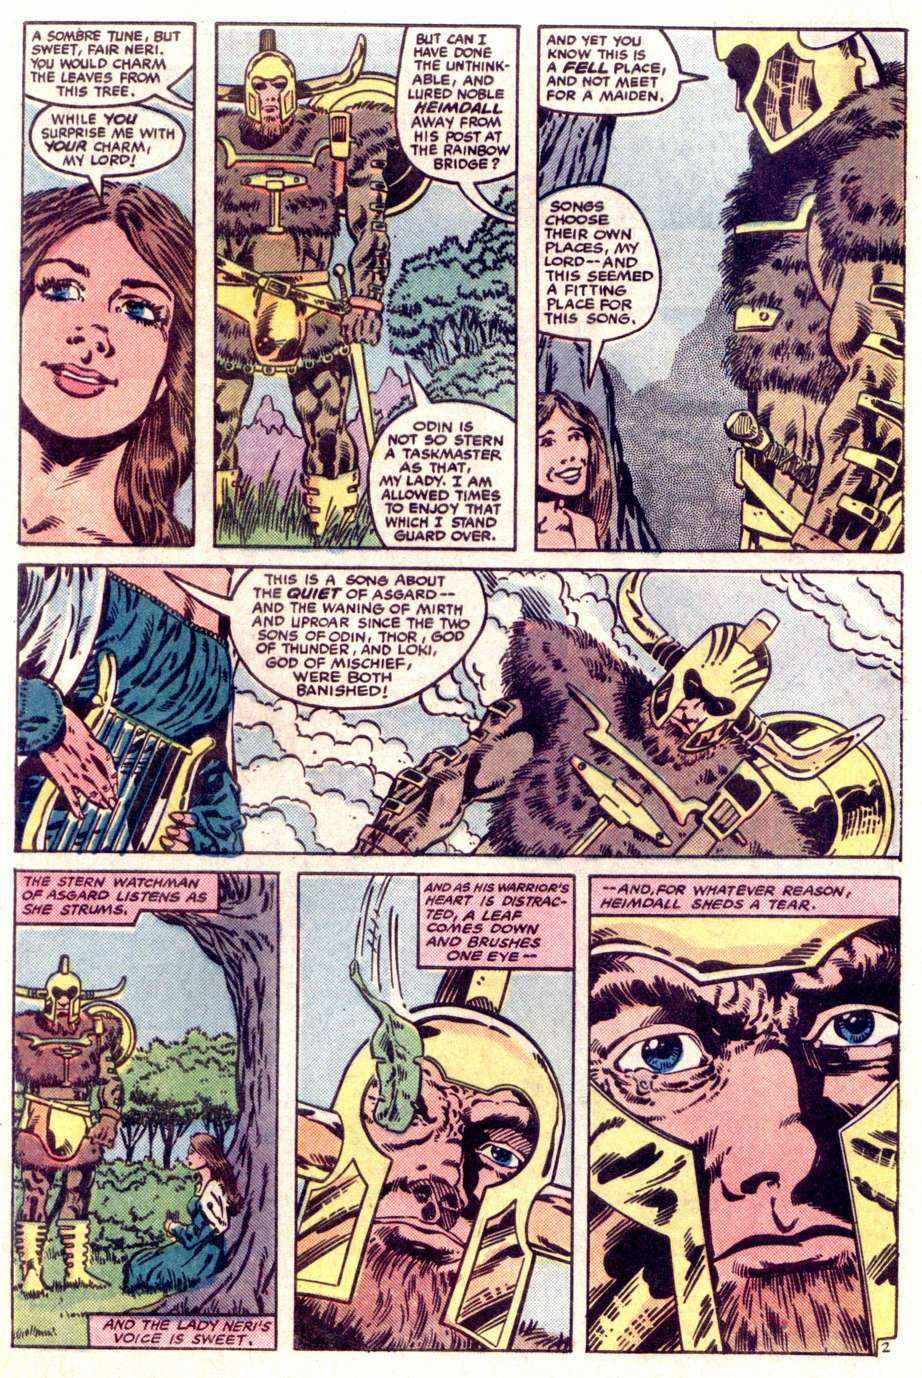 What If? (1977) issue 47 - Loki had found The hammer of Thor - Page 3